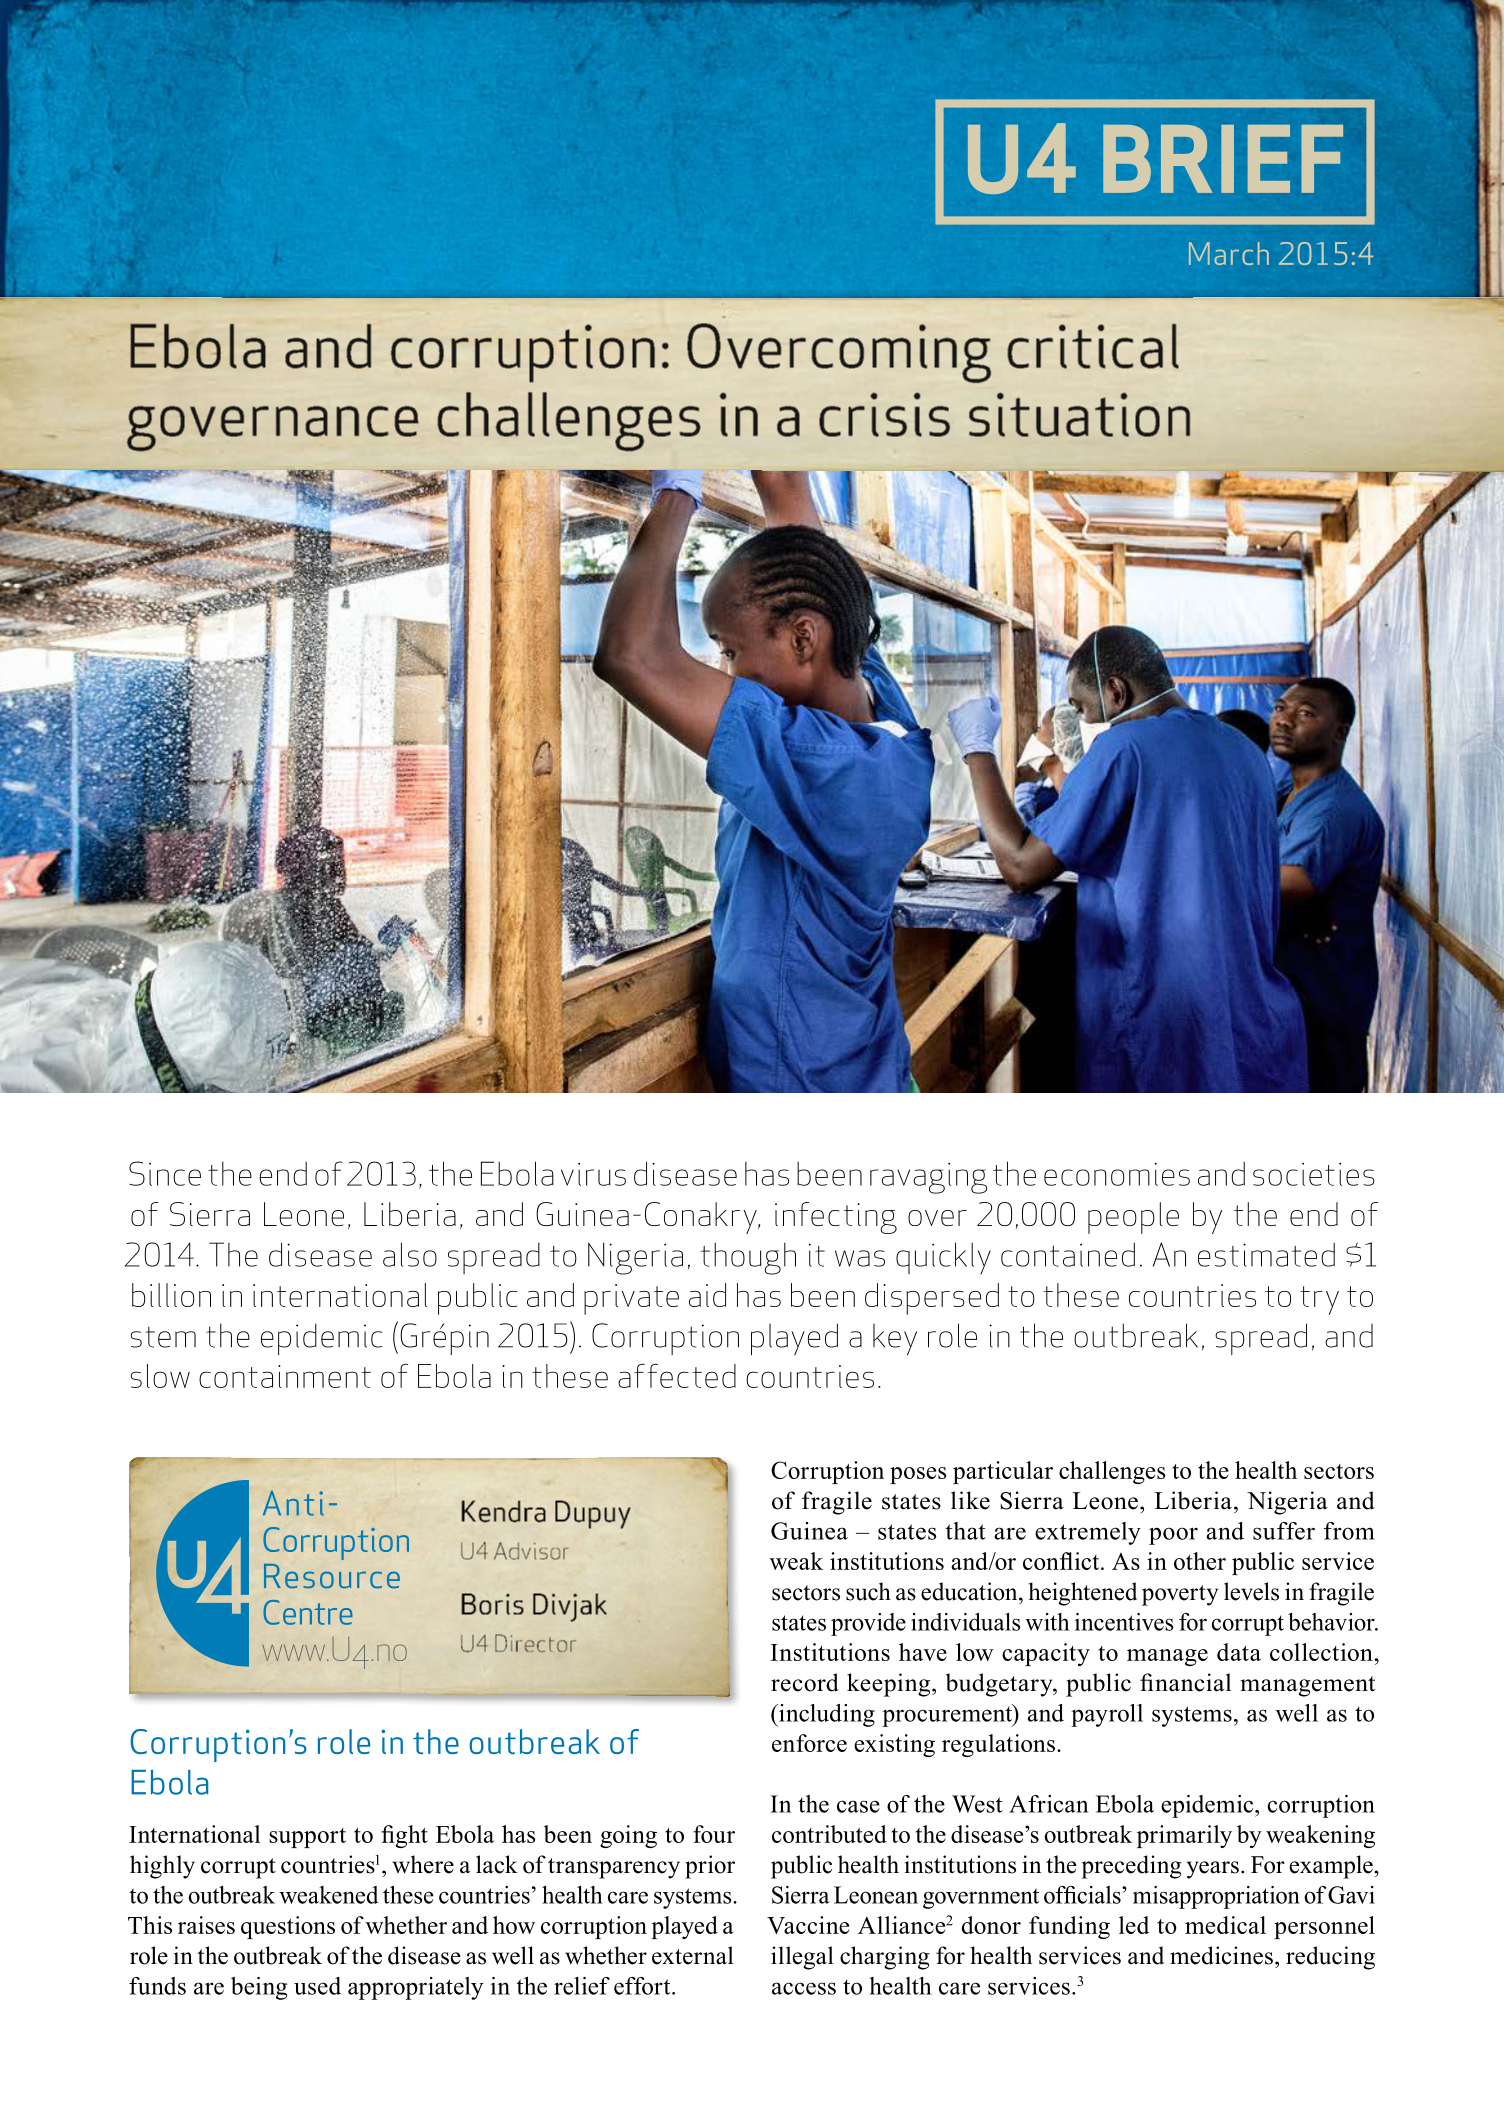 Ebola and corruption: Overcoming critical governance challenges in a crisis situation